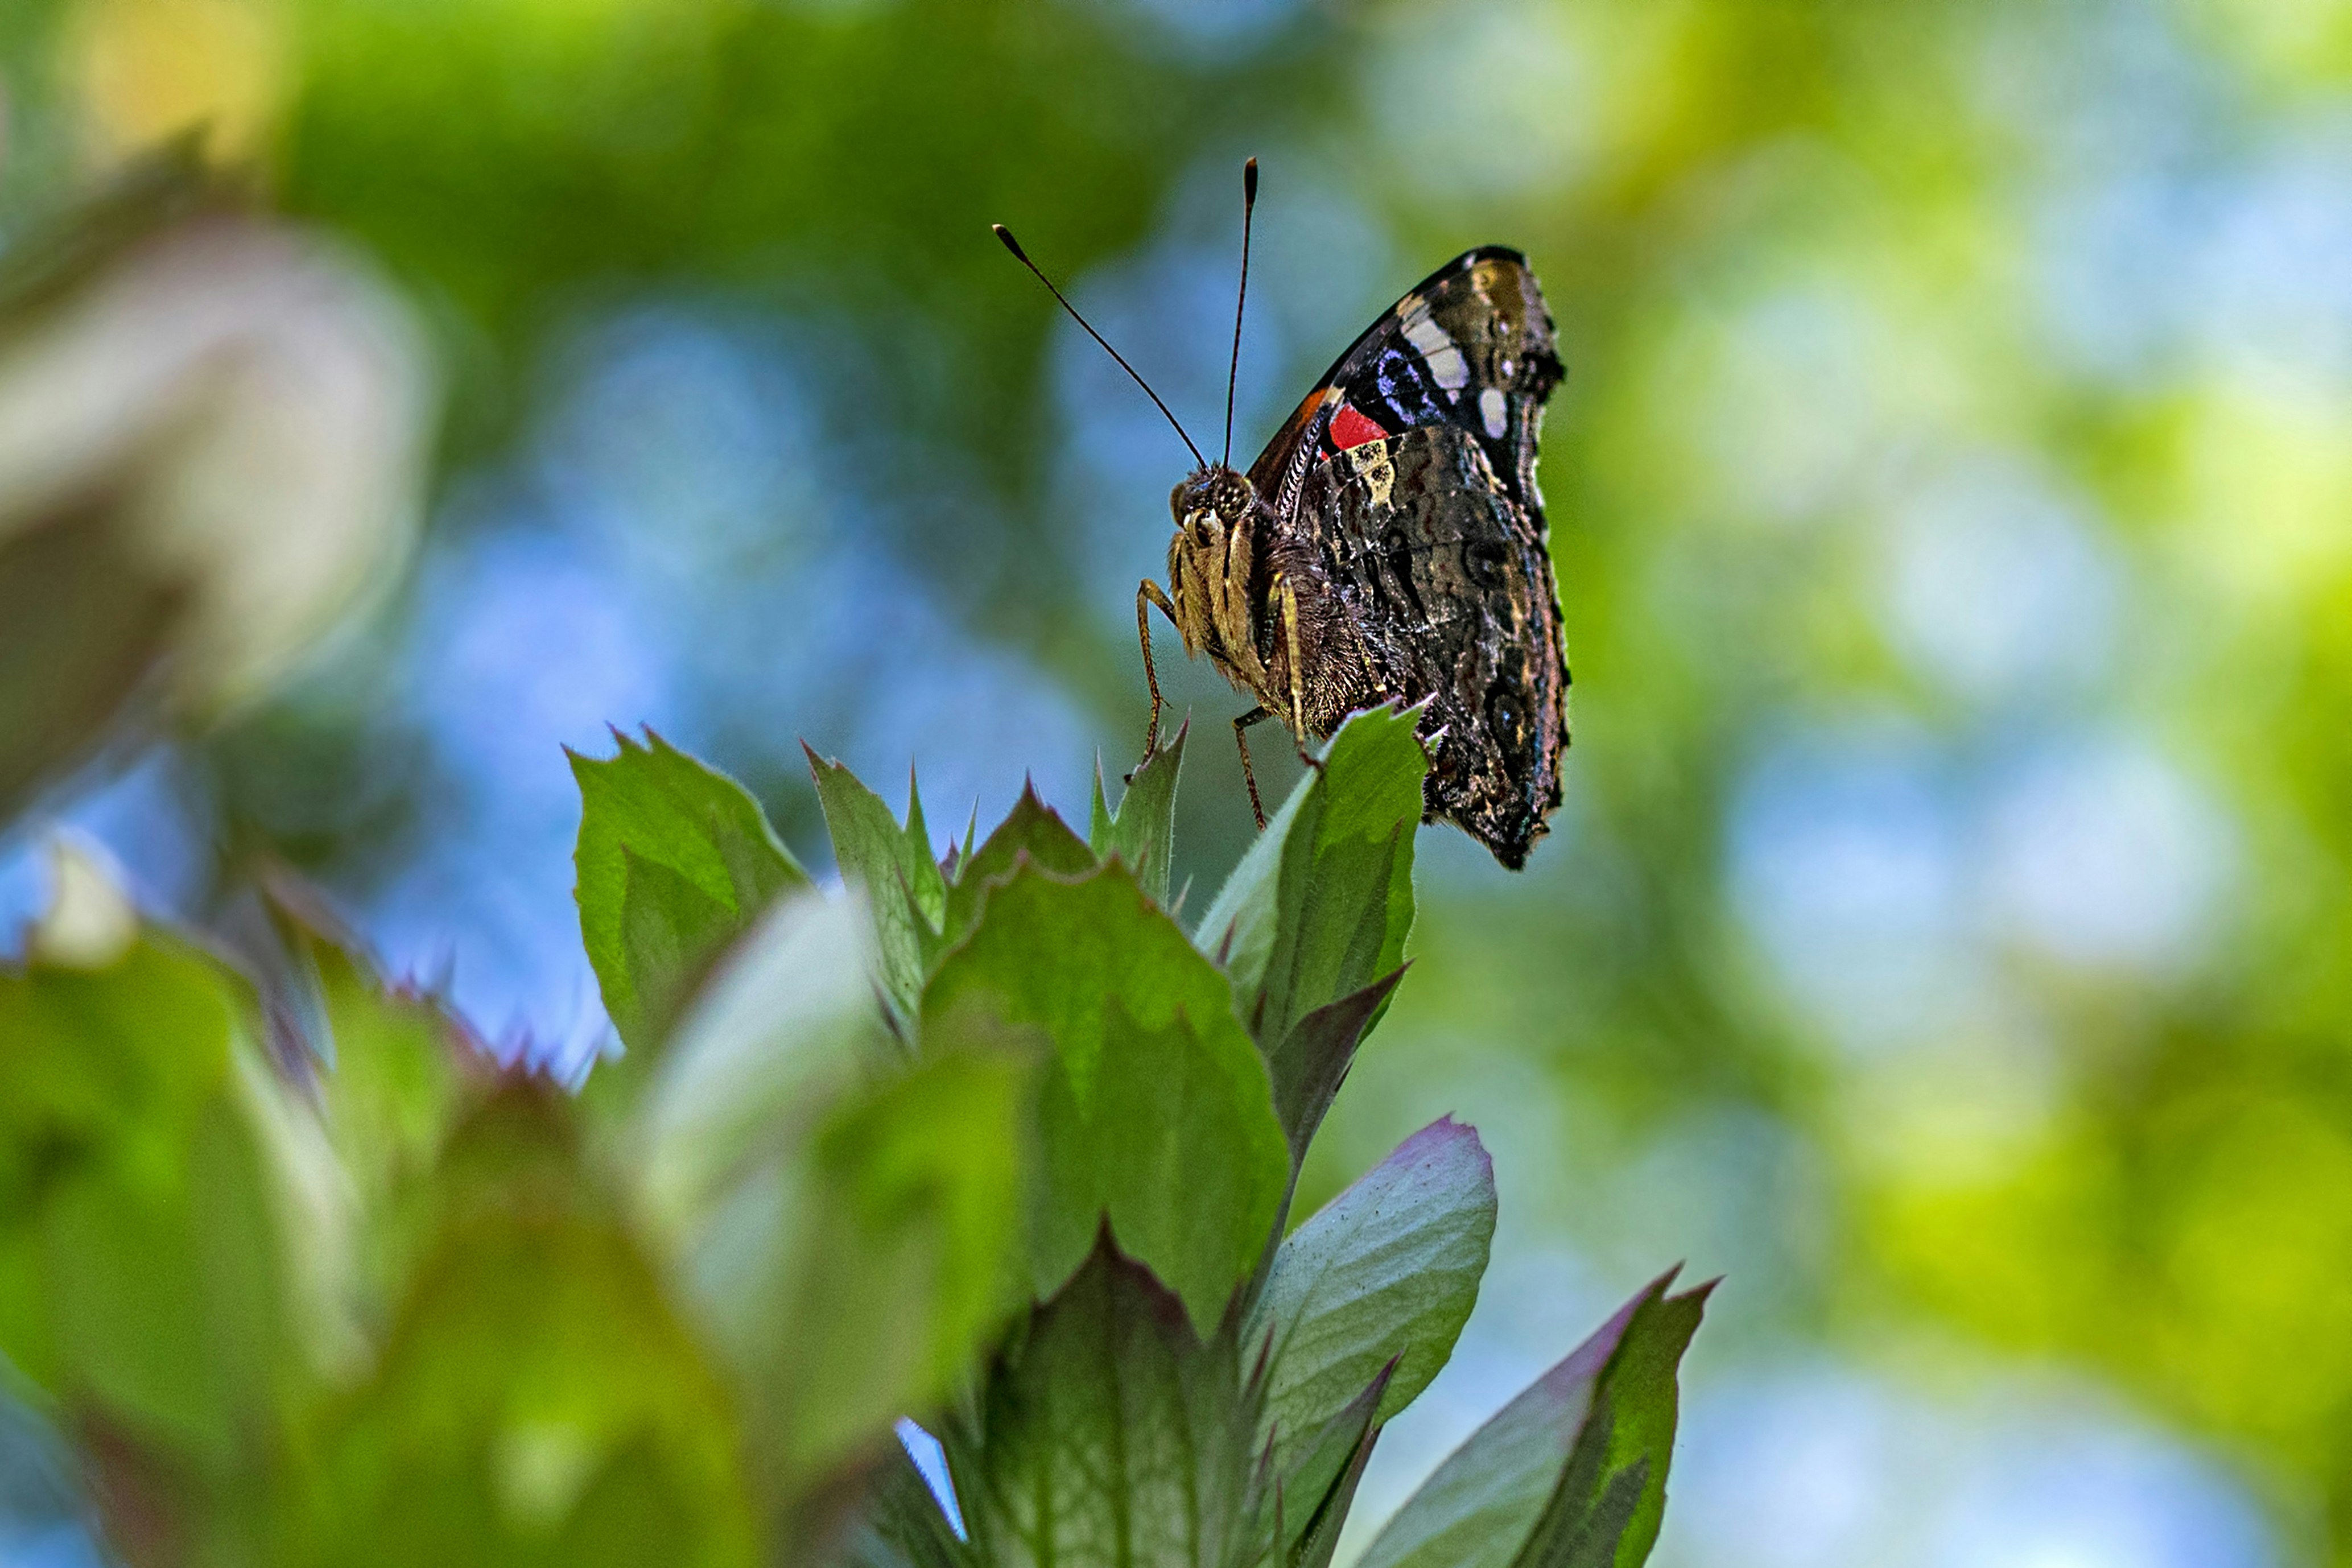 black white and orange butterfly perched on green leaf during daytime